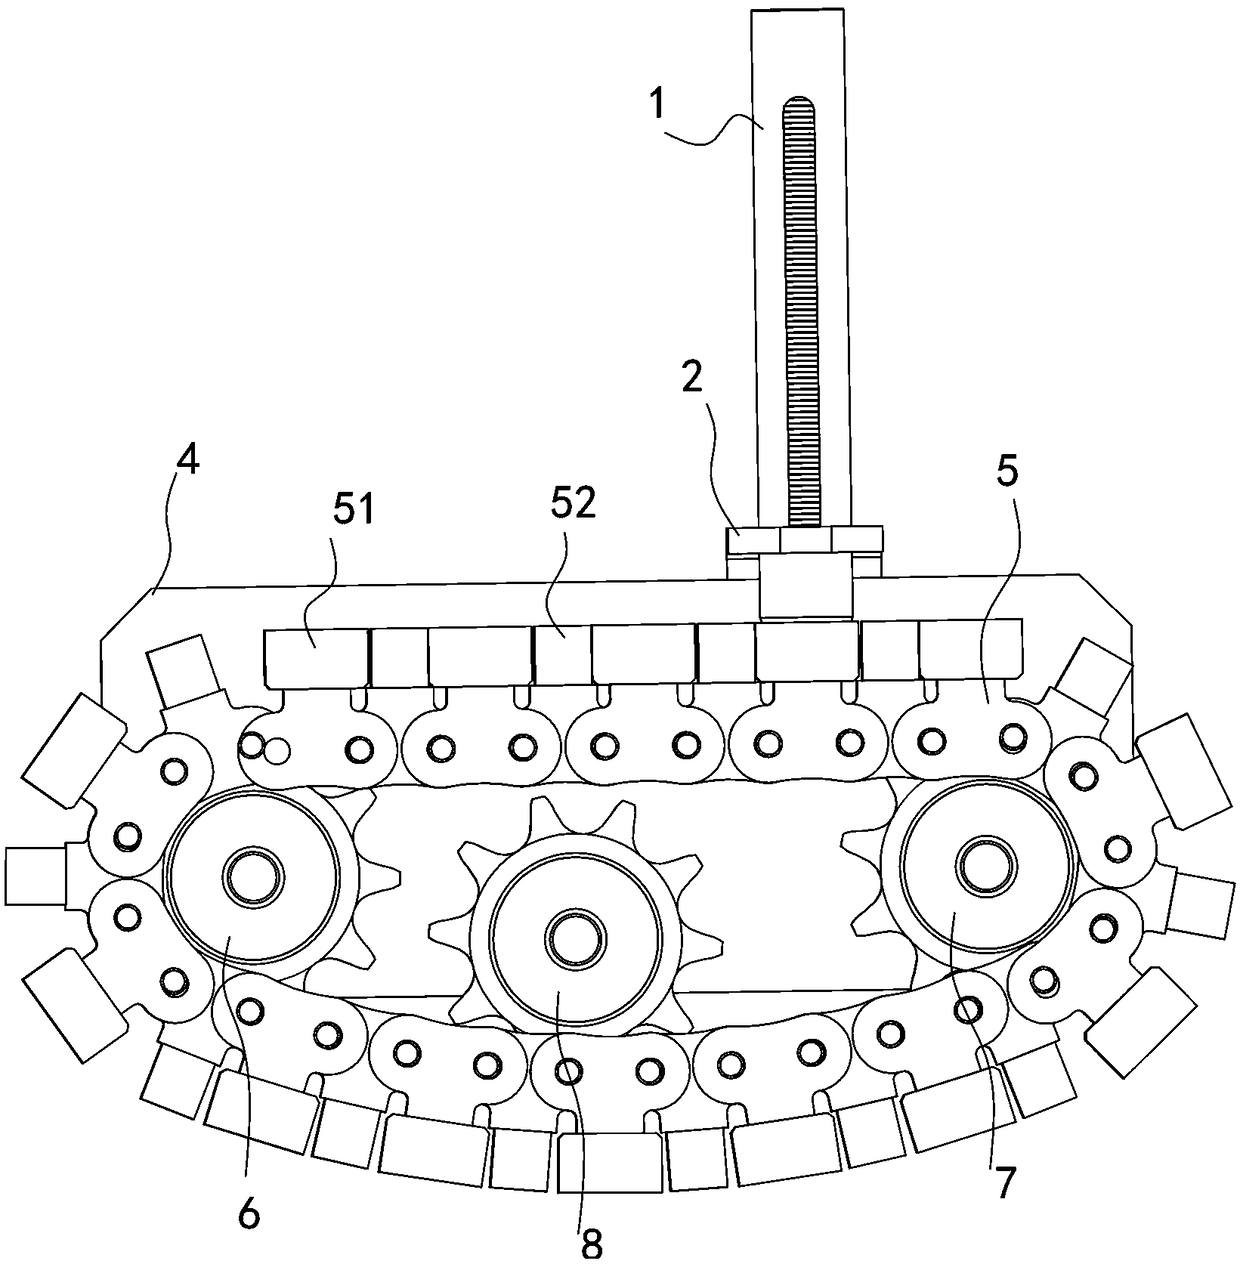 Chain-type gasket quantitative supply and assembly equipment